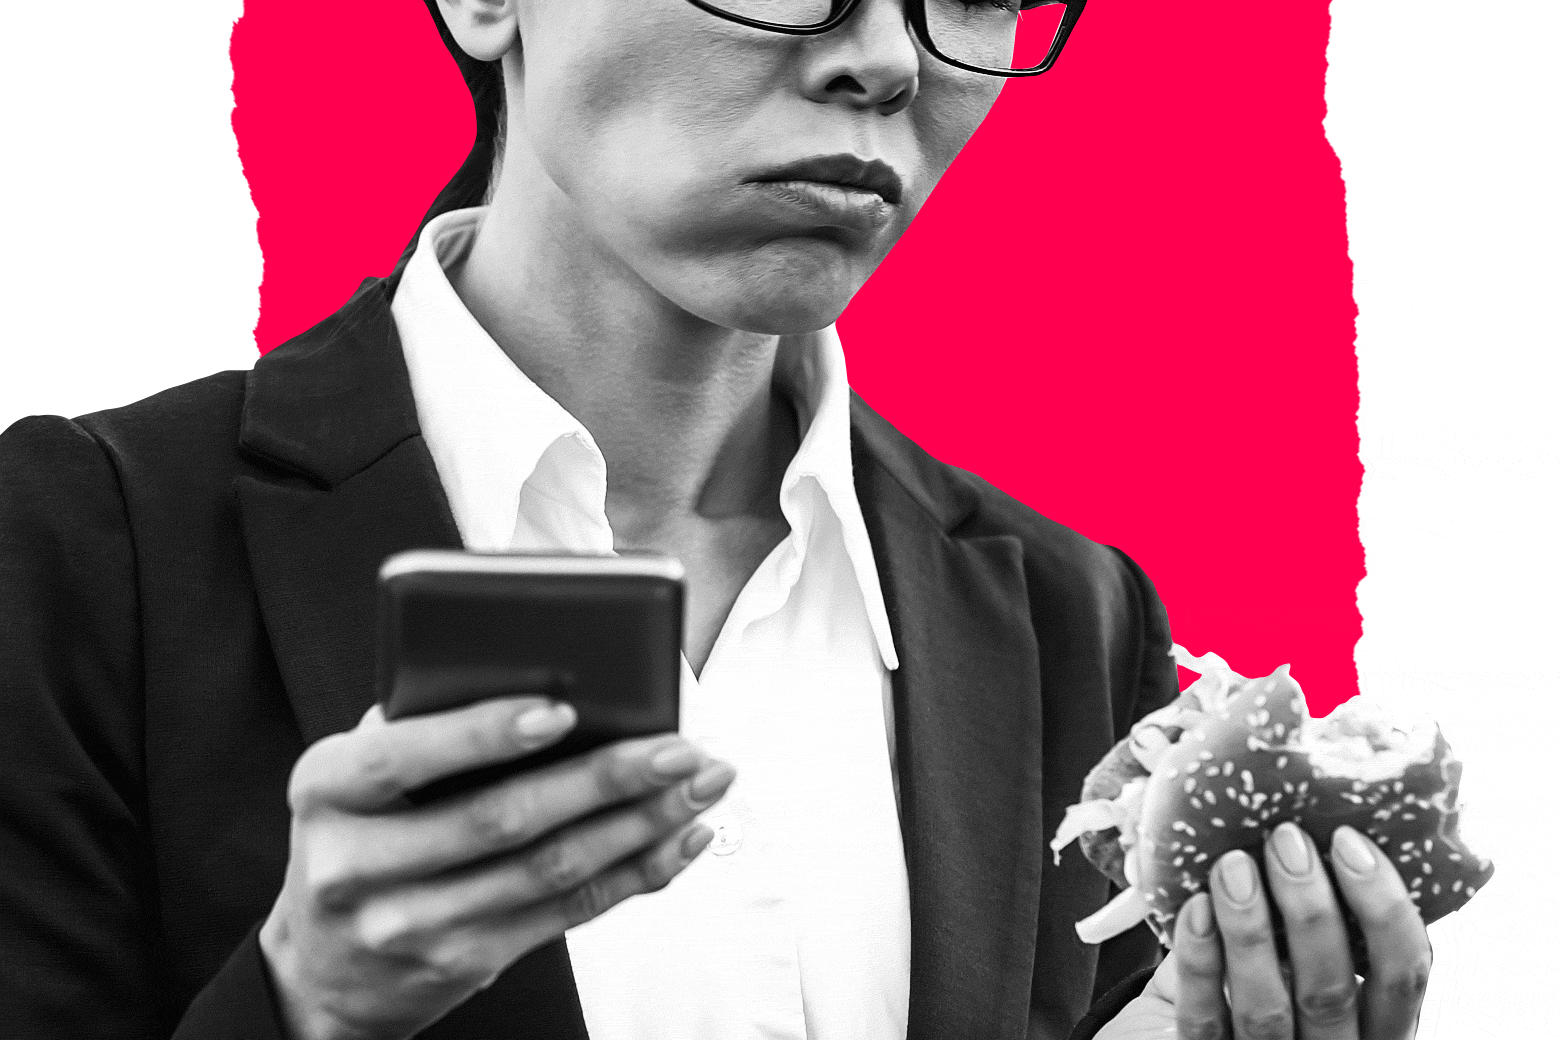 A woman looks between her phone in one hand and a burger in the other.